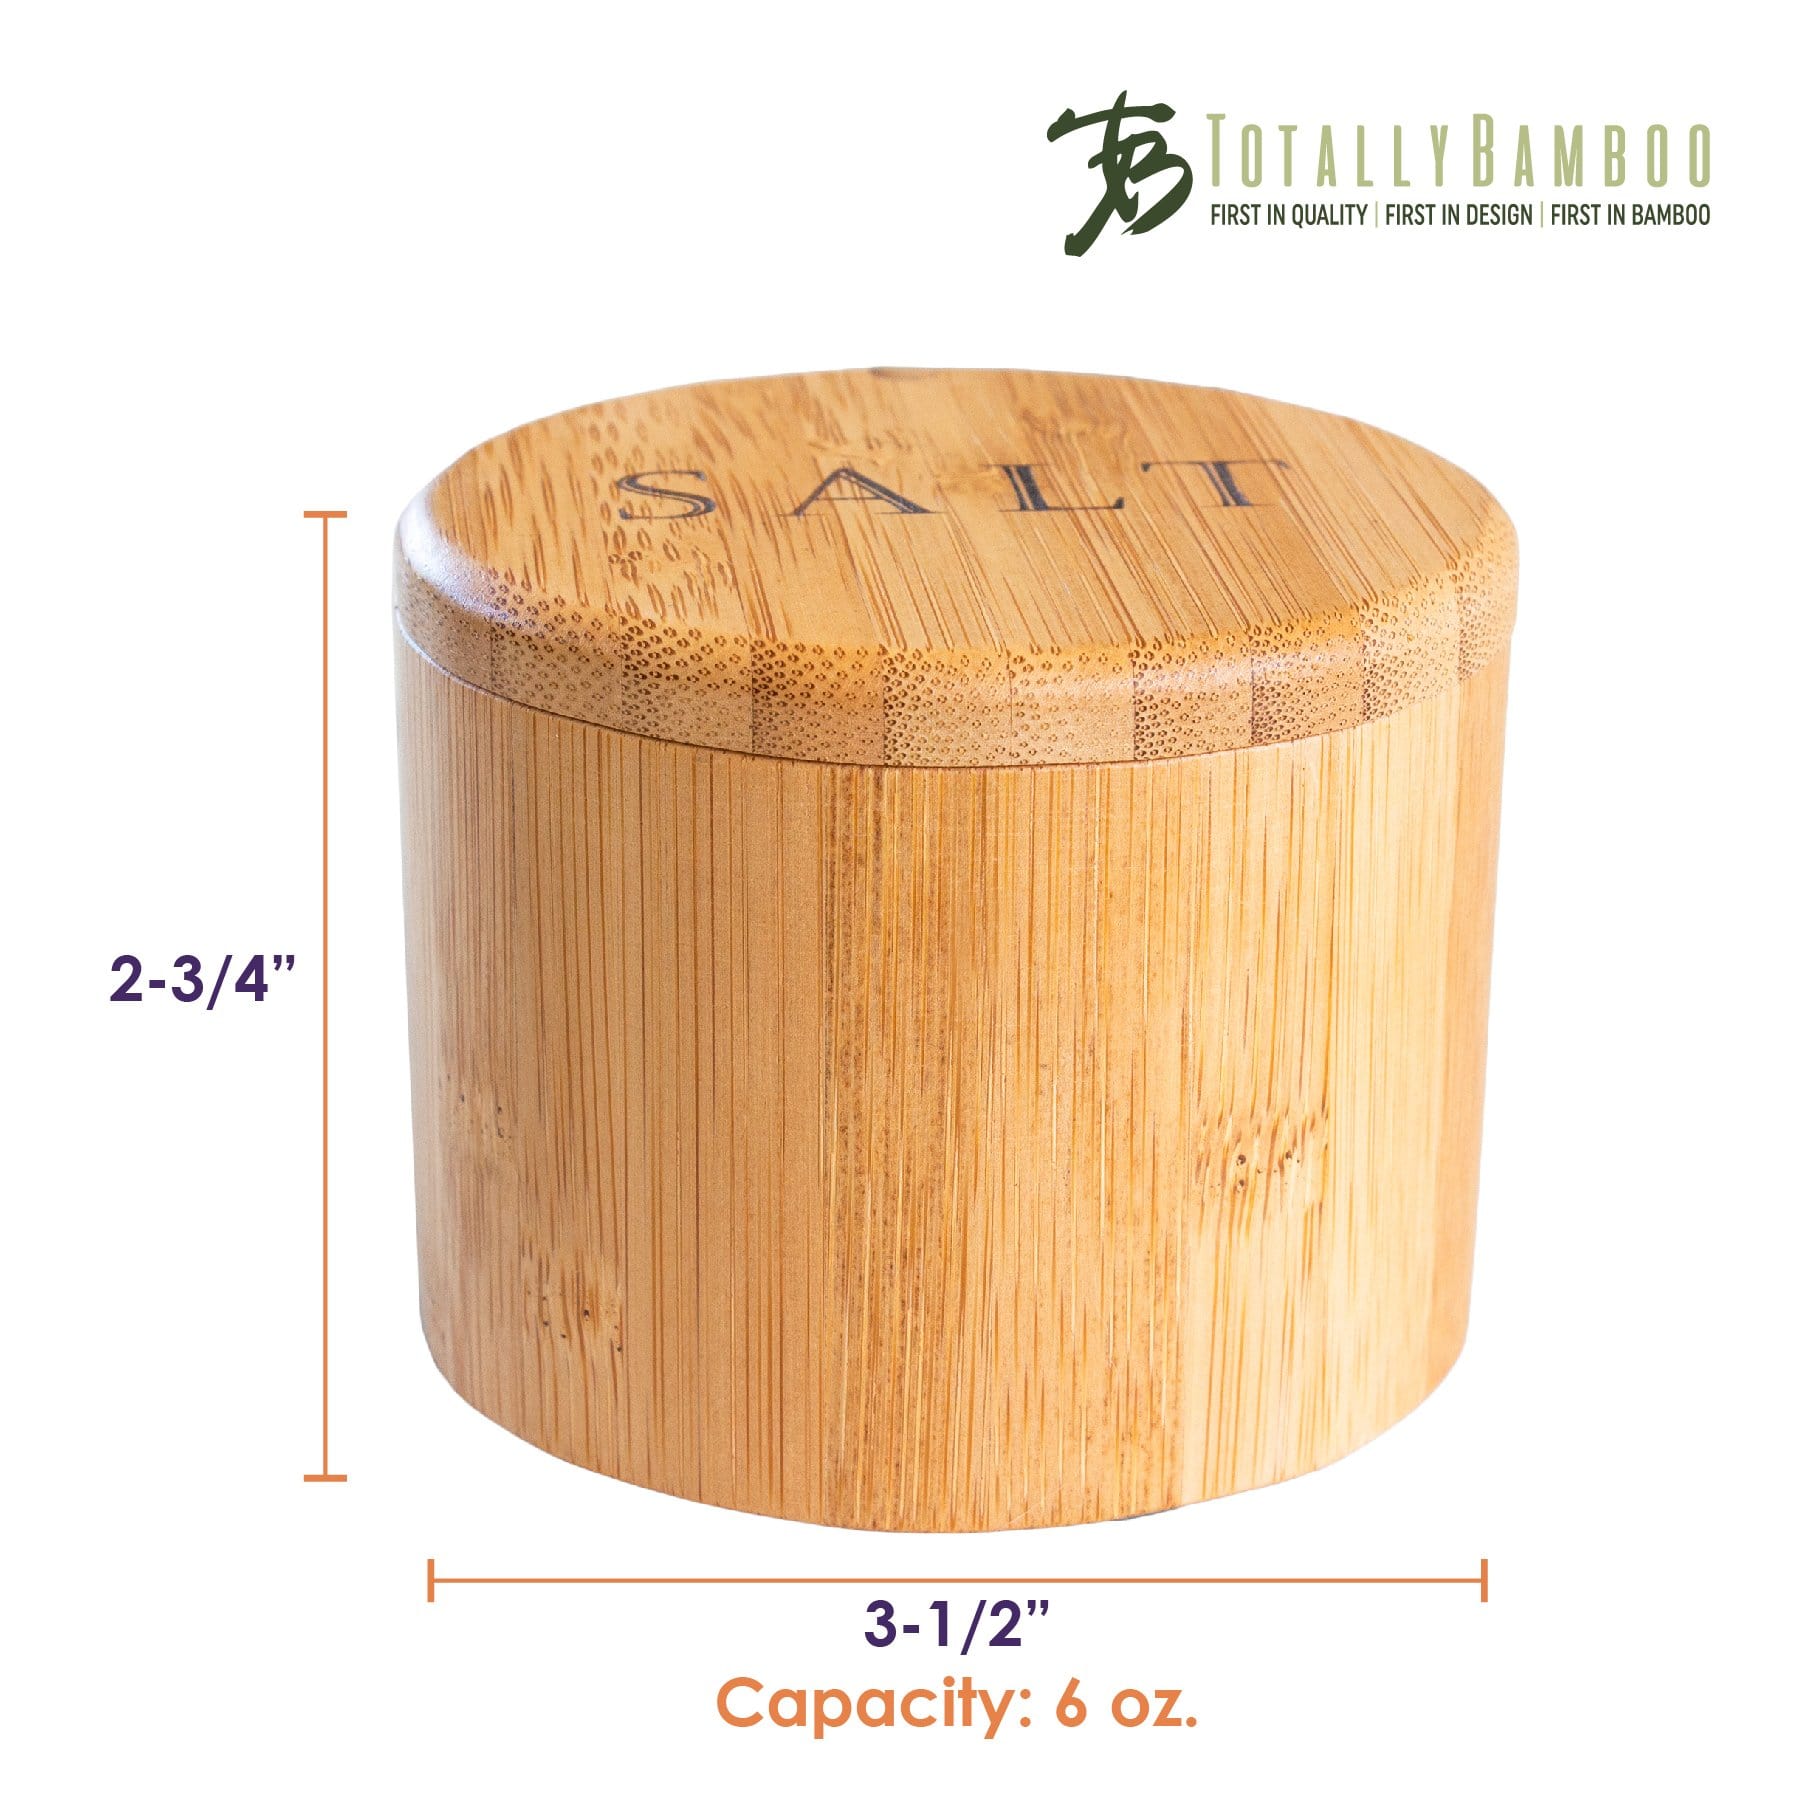 Totally Bamboo Box Salt Keeper Duet, Bamboo Container with Magnetic Lid